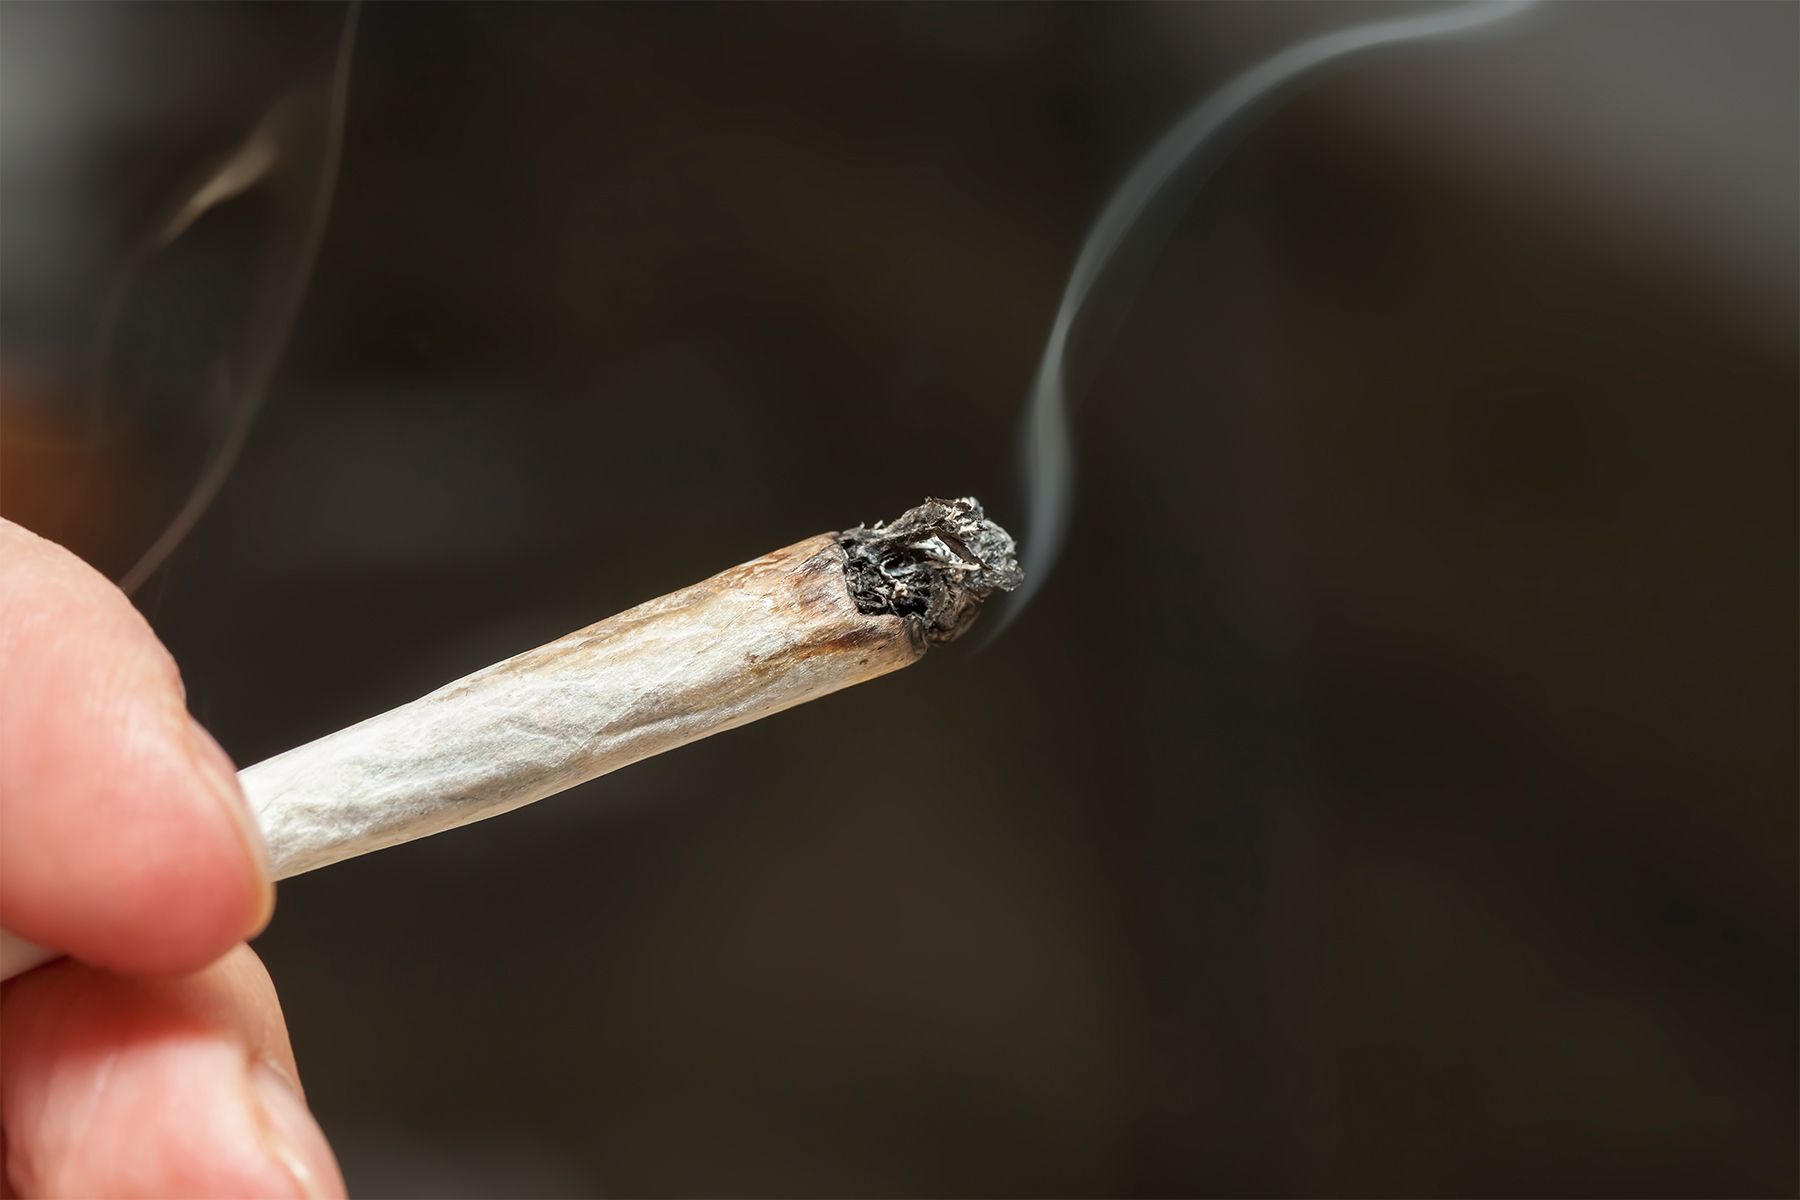 Marijuana Use Tied to Higher Odds for Thoughts of Suicide